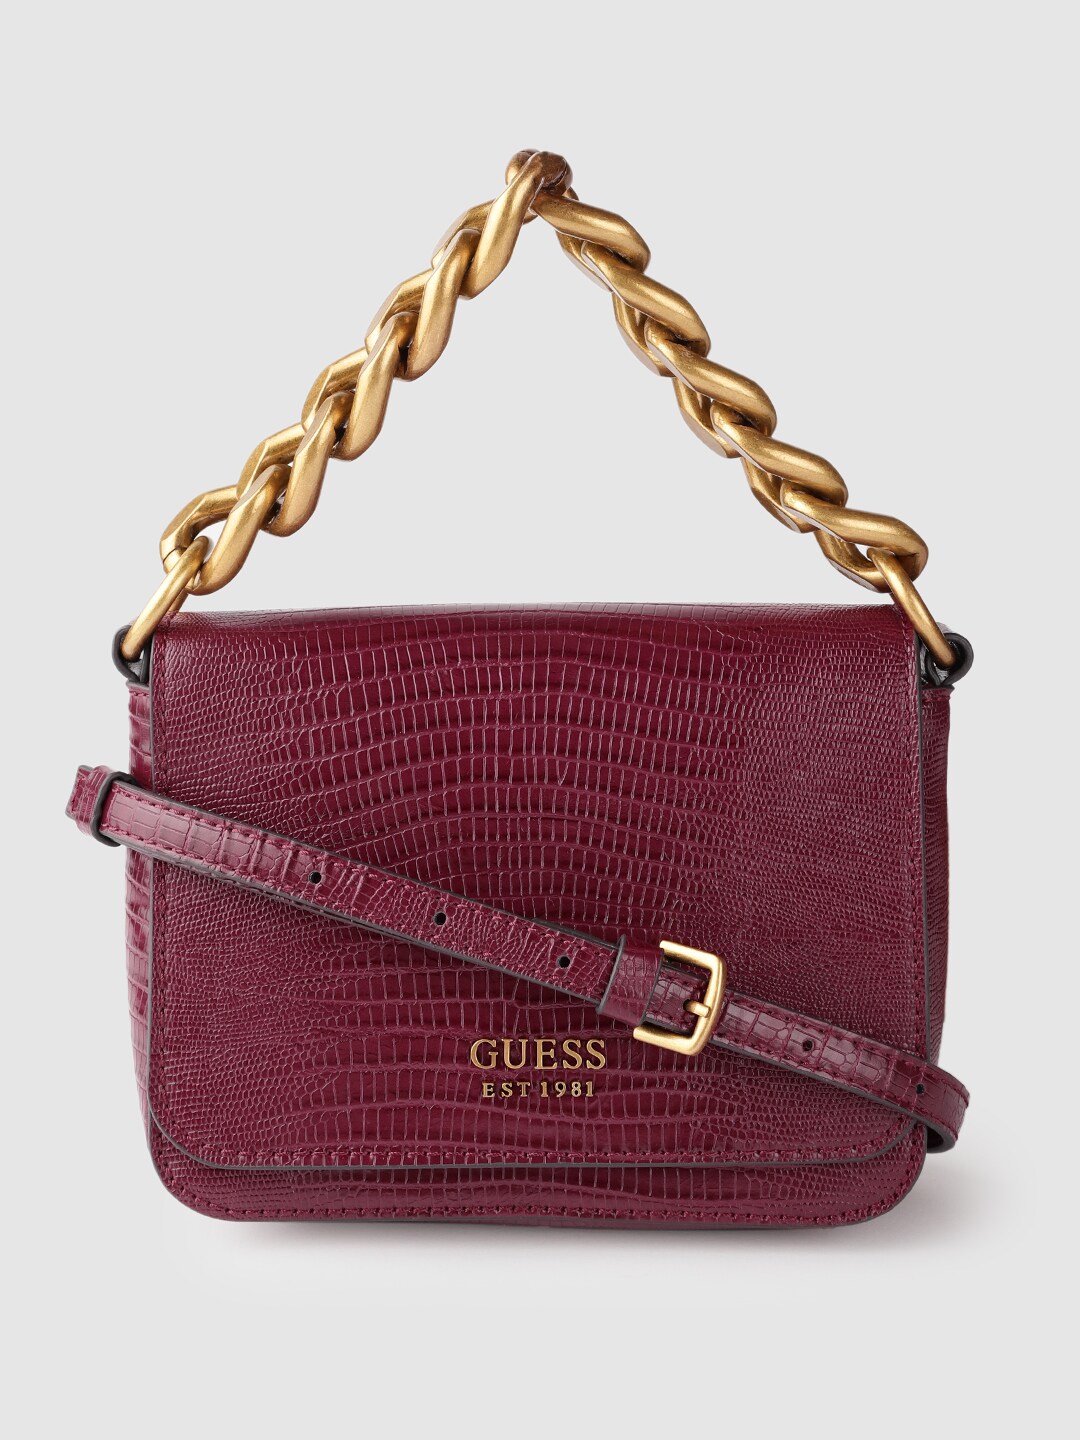 GUESS Women Maroon Snake Skin Textured Structured Handheld Bag Price in India